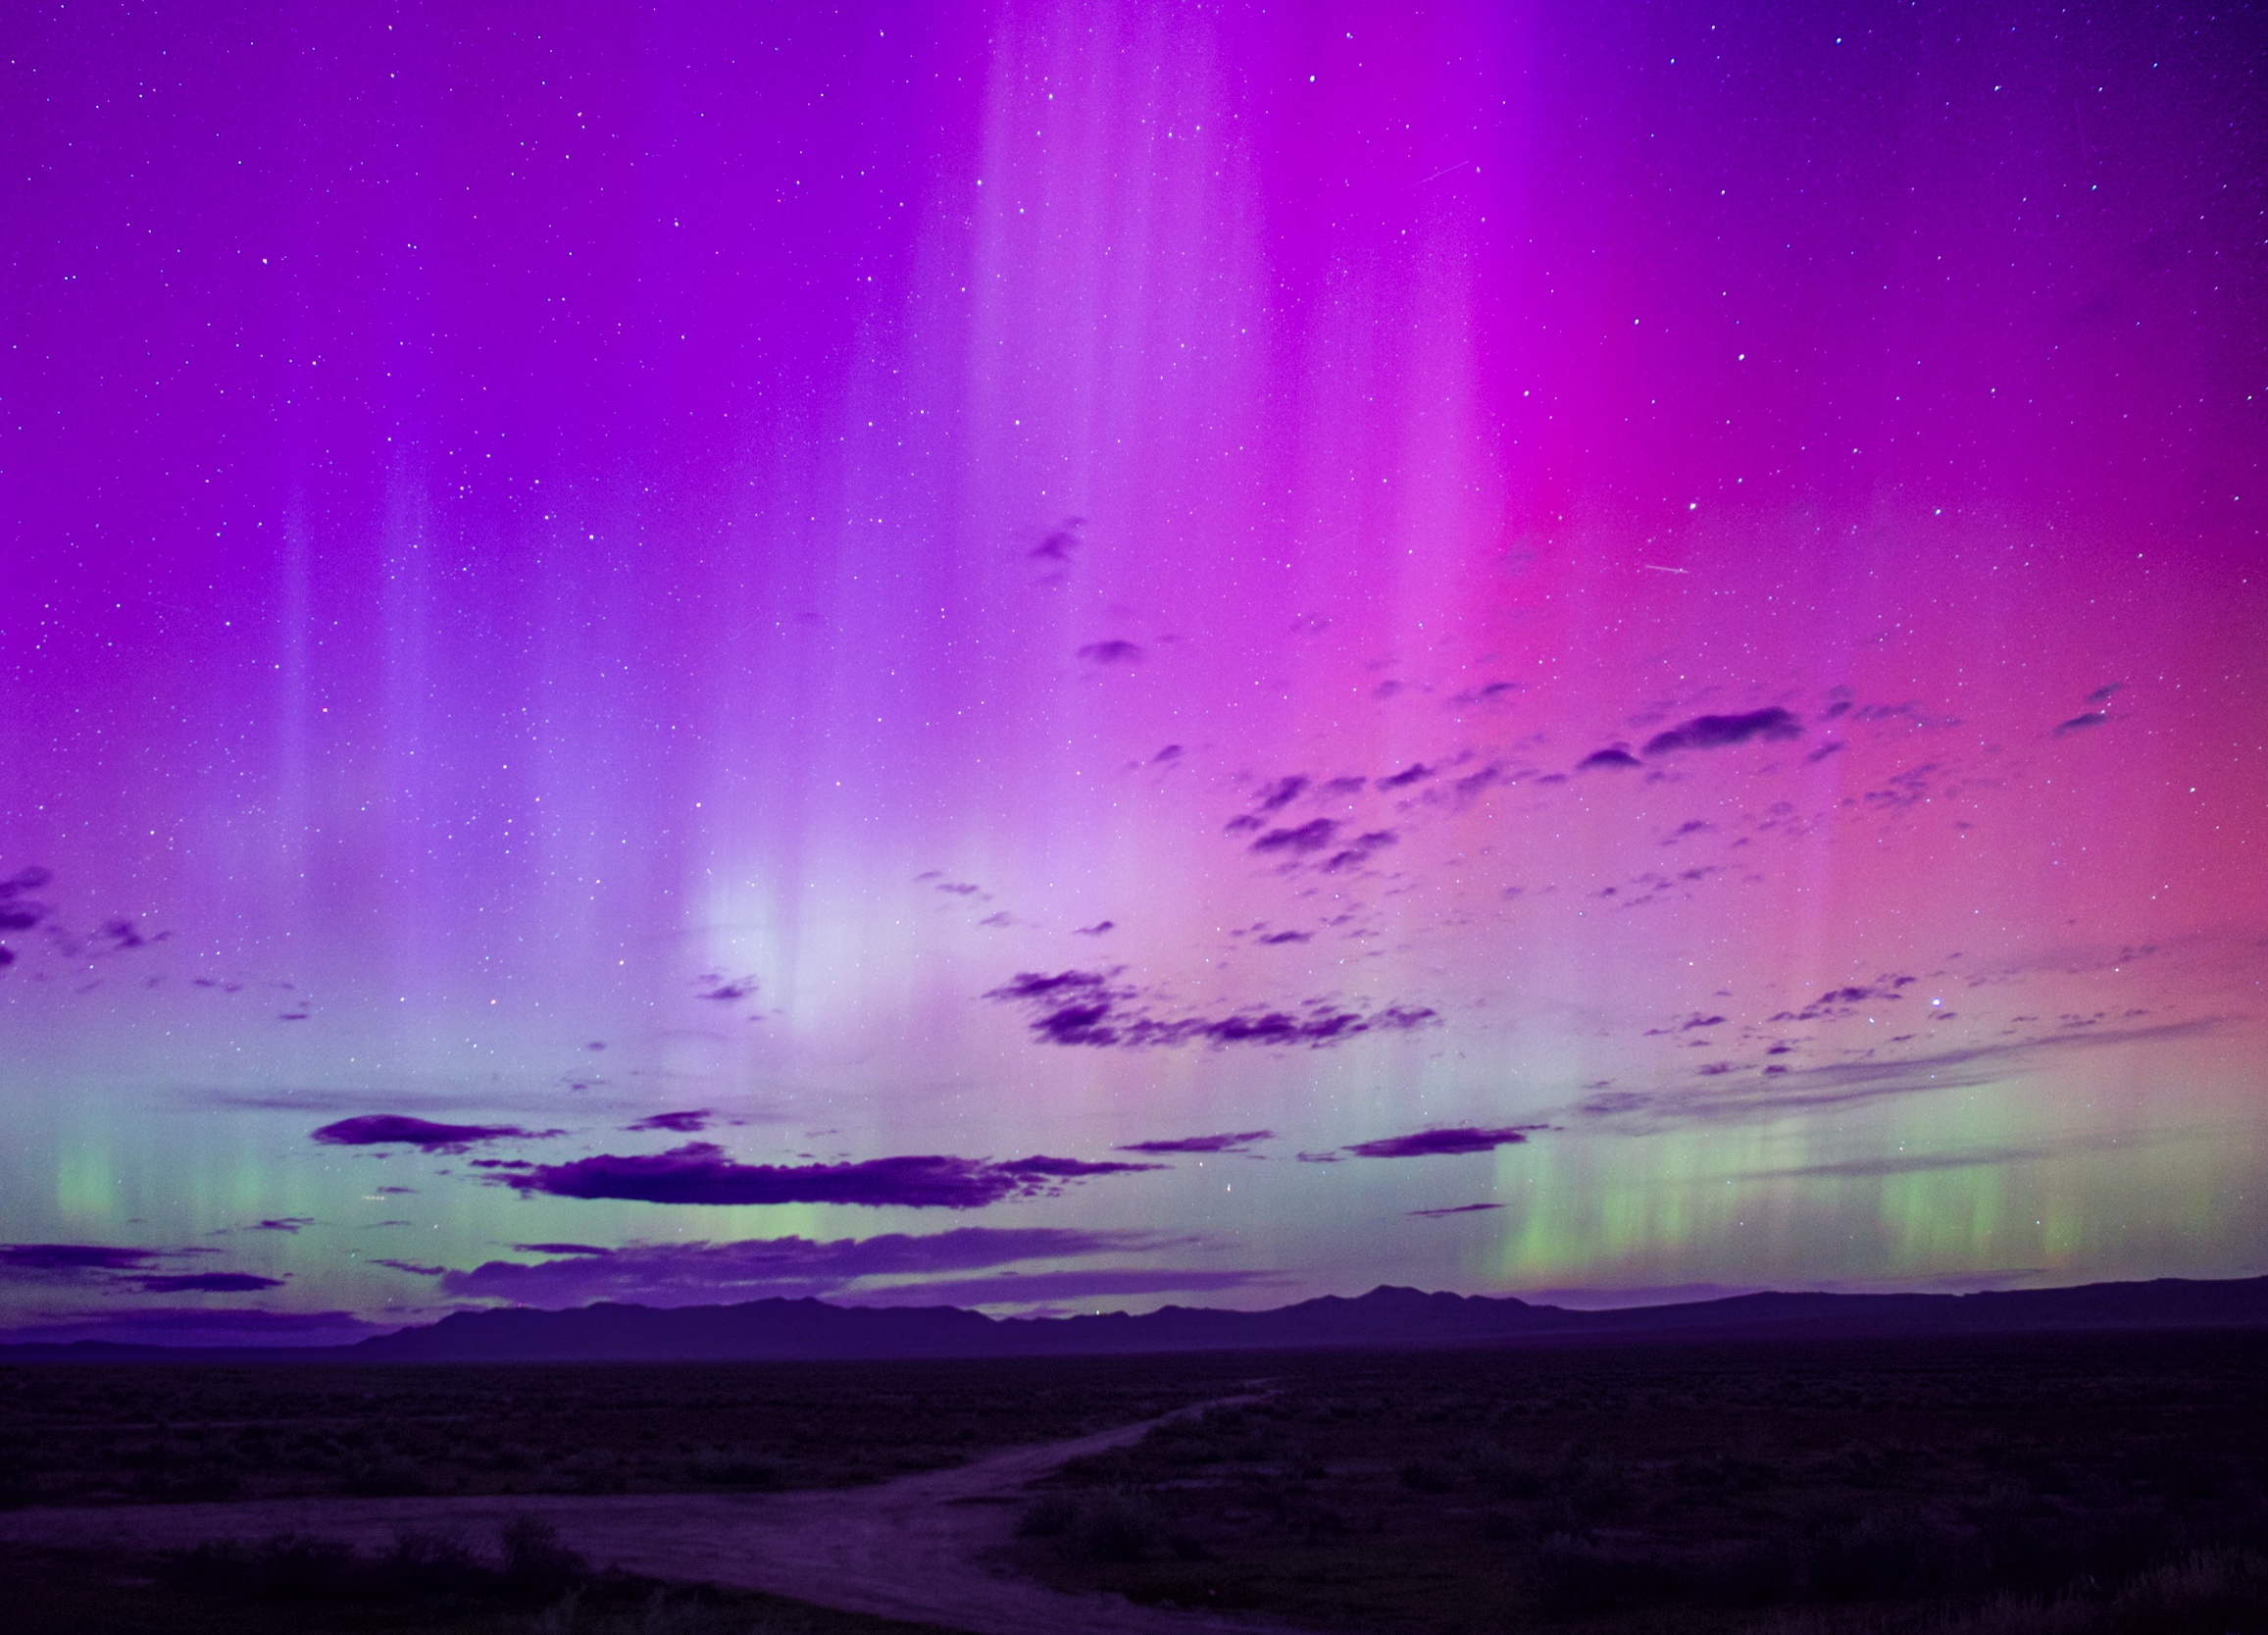 a dark horizon at night. in the sky are curtains of light in shades of purple, yellow, and green